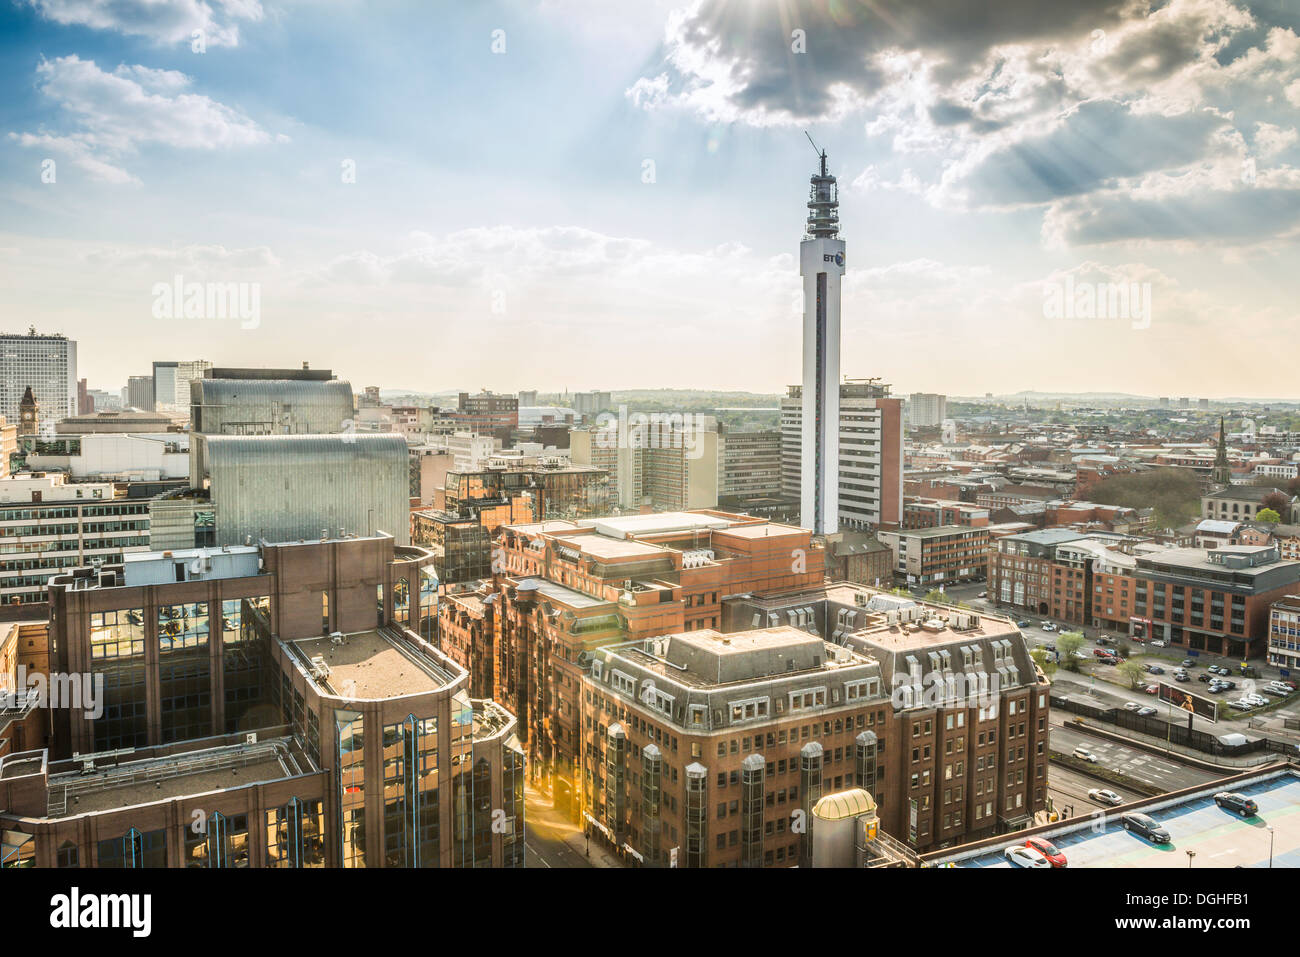 The city centre and the Jewellery Quarter of Birmingham, West Midlands, England, UK Stock Photo